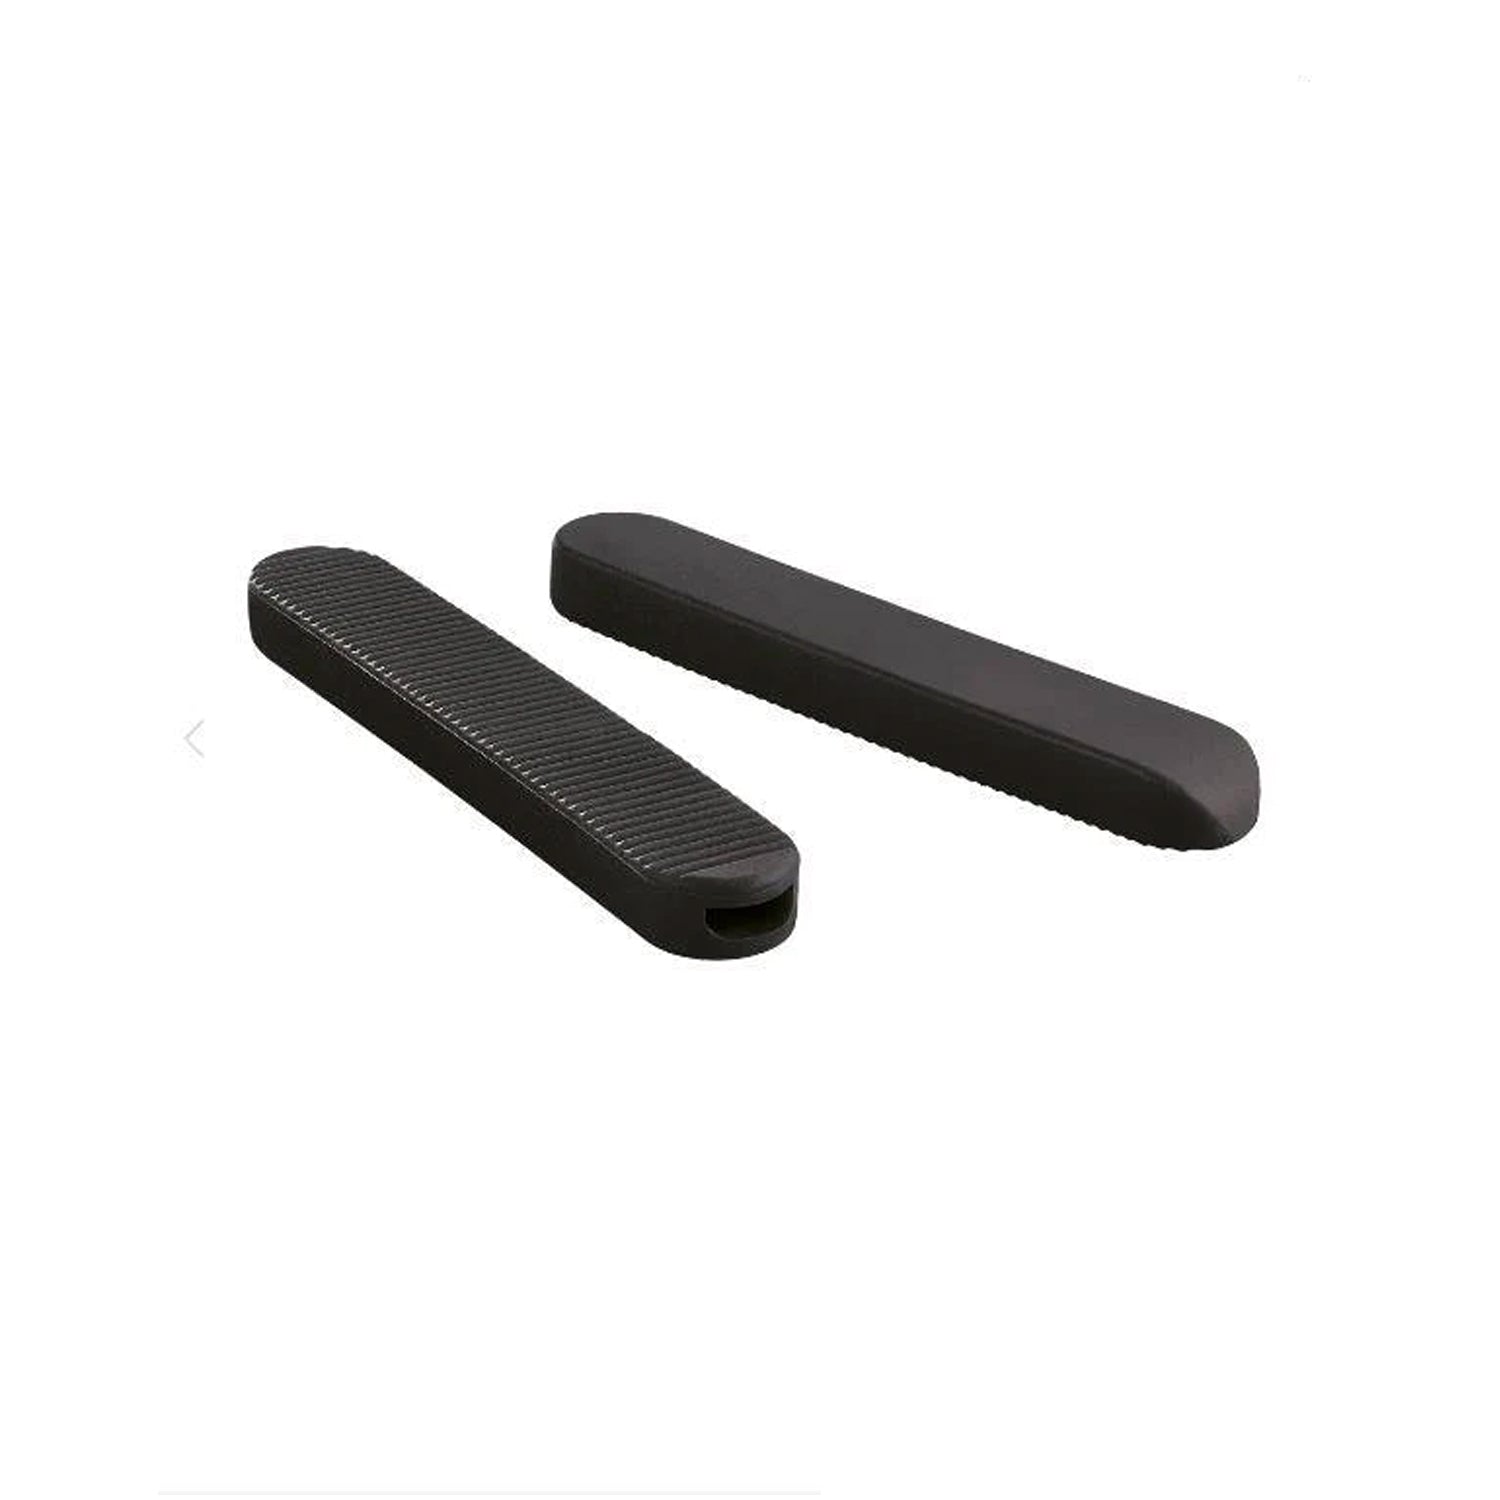 [Triangle] Silicone tips for tweezers 30 cm